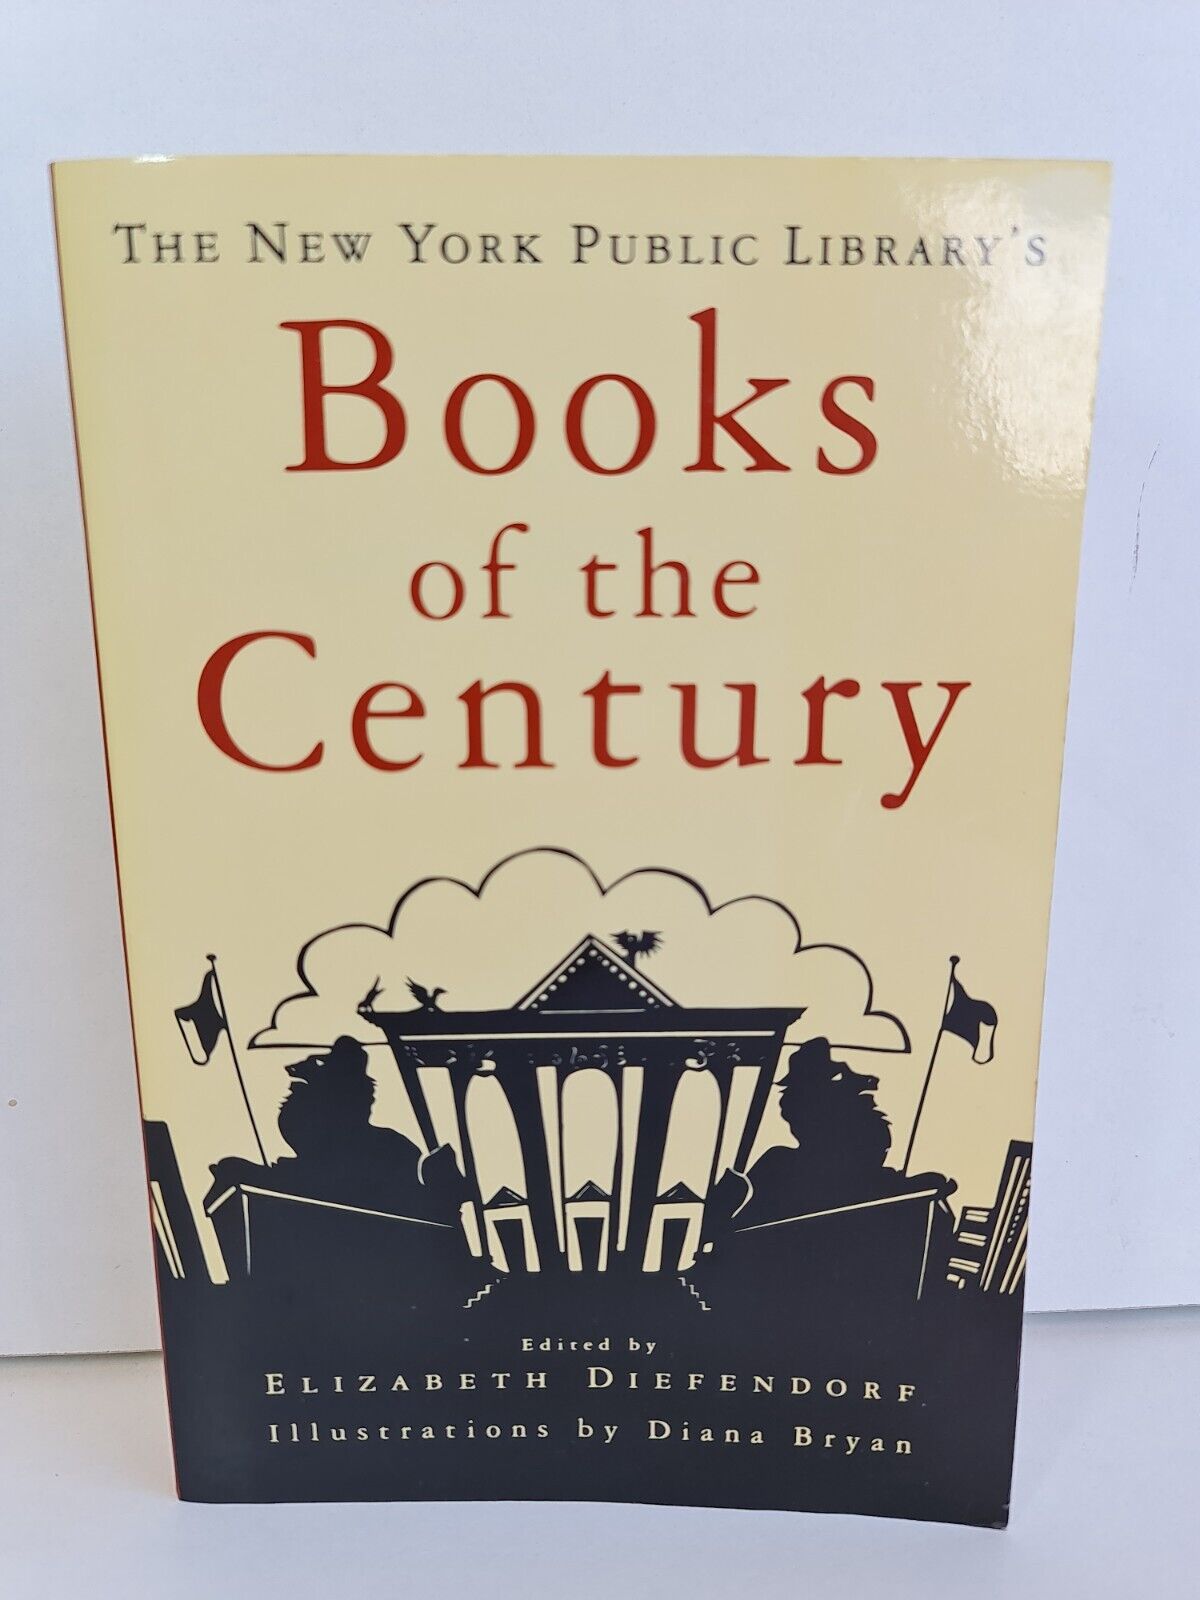 The New York Public Library's Books of the Century (1997)